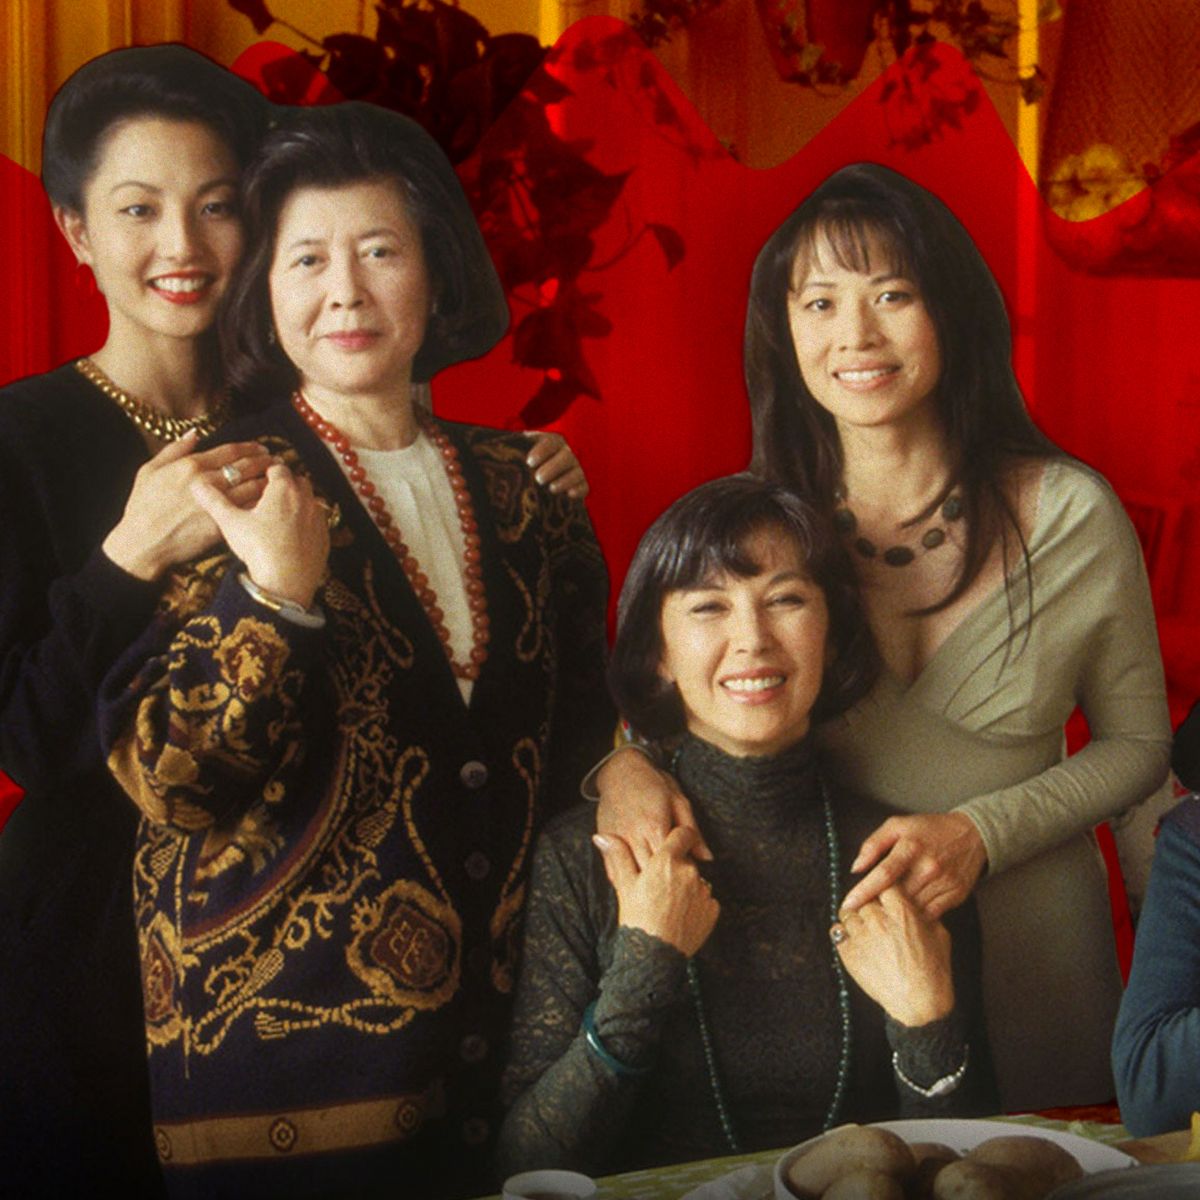 Waverly, played by Tamlyn Tomita, Lindo, played by Tsai Chin, Ying-Ying, played by France Nuyen and Lena, played by Lauren Tom in the first major studio movie with a female Asian American cast, The Joy Luck Club, in 1993.